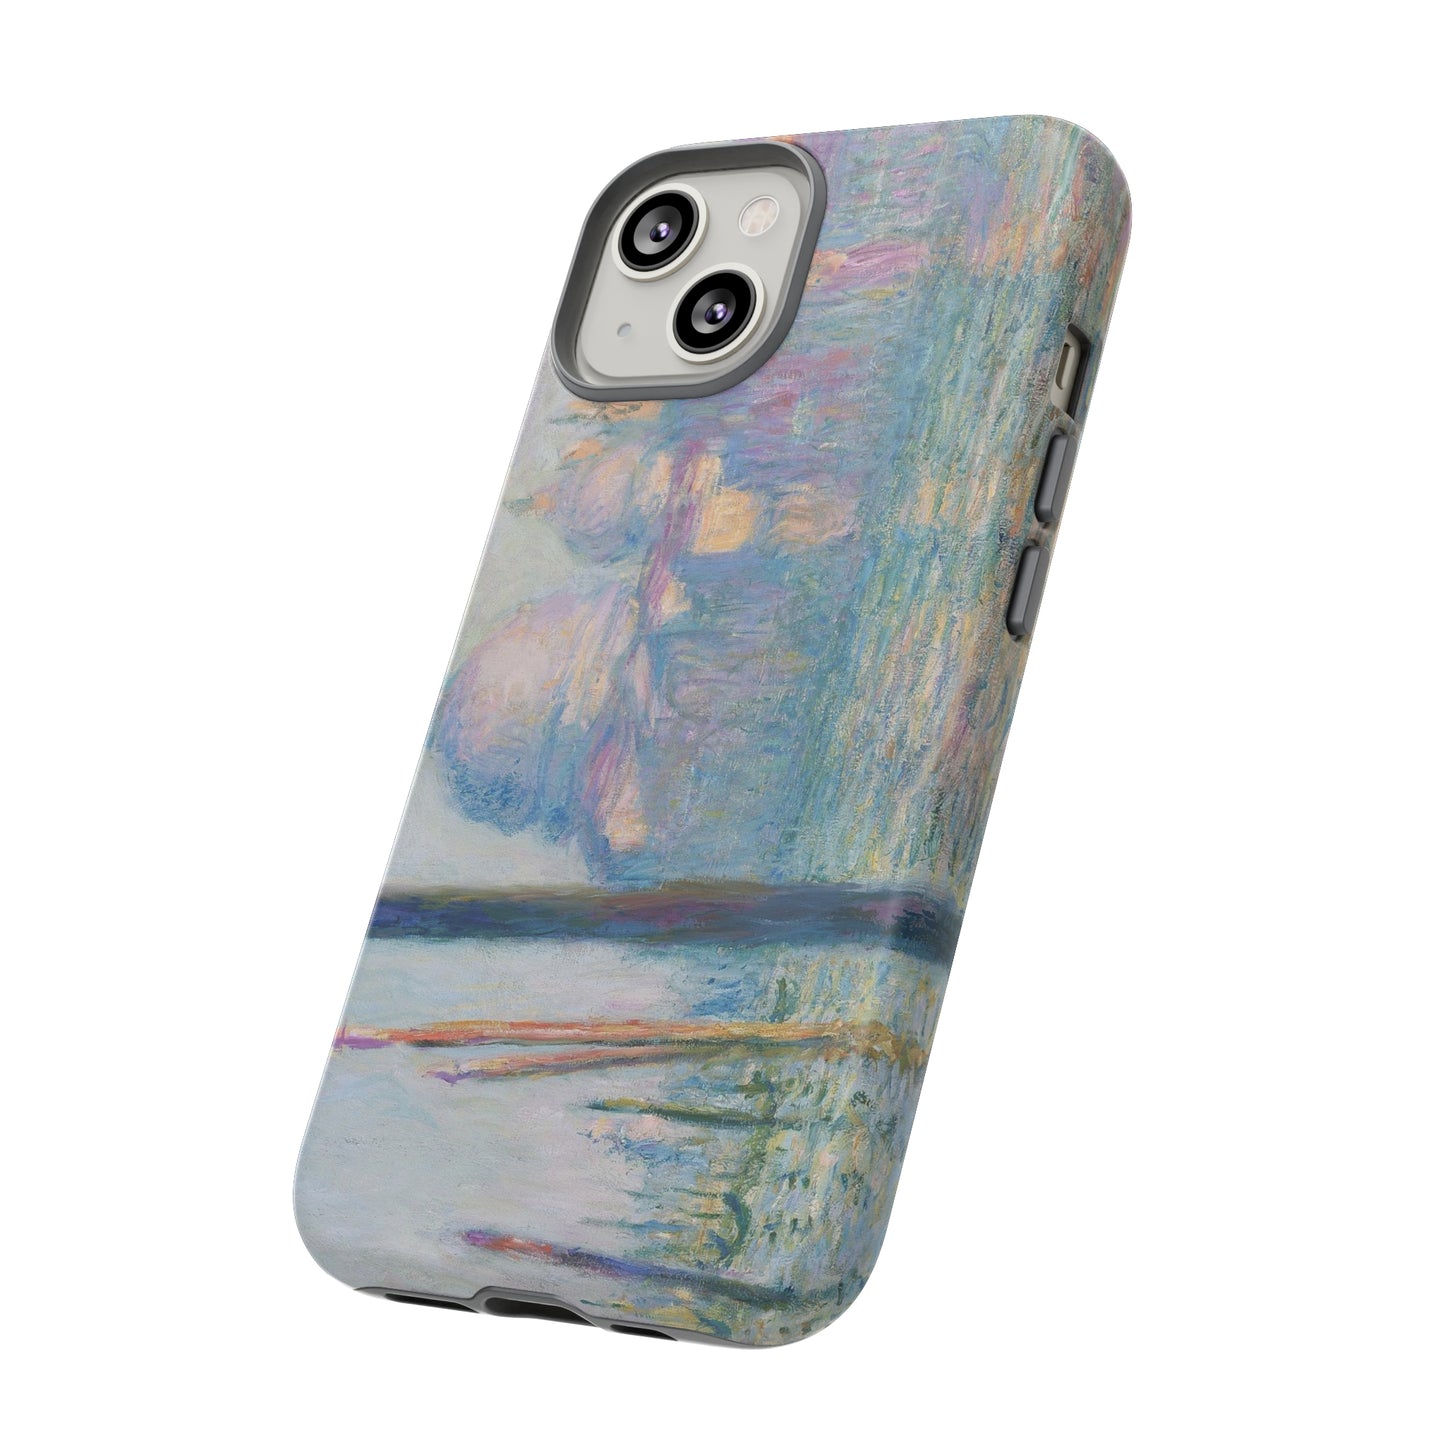 Le Grande Canal by Claude Monet - Cell Phone Case